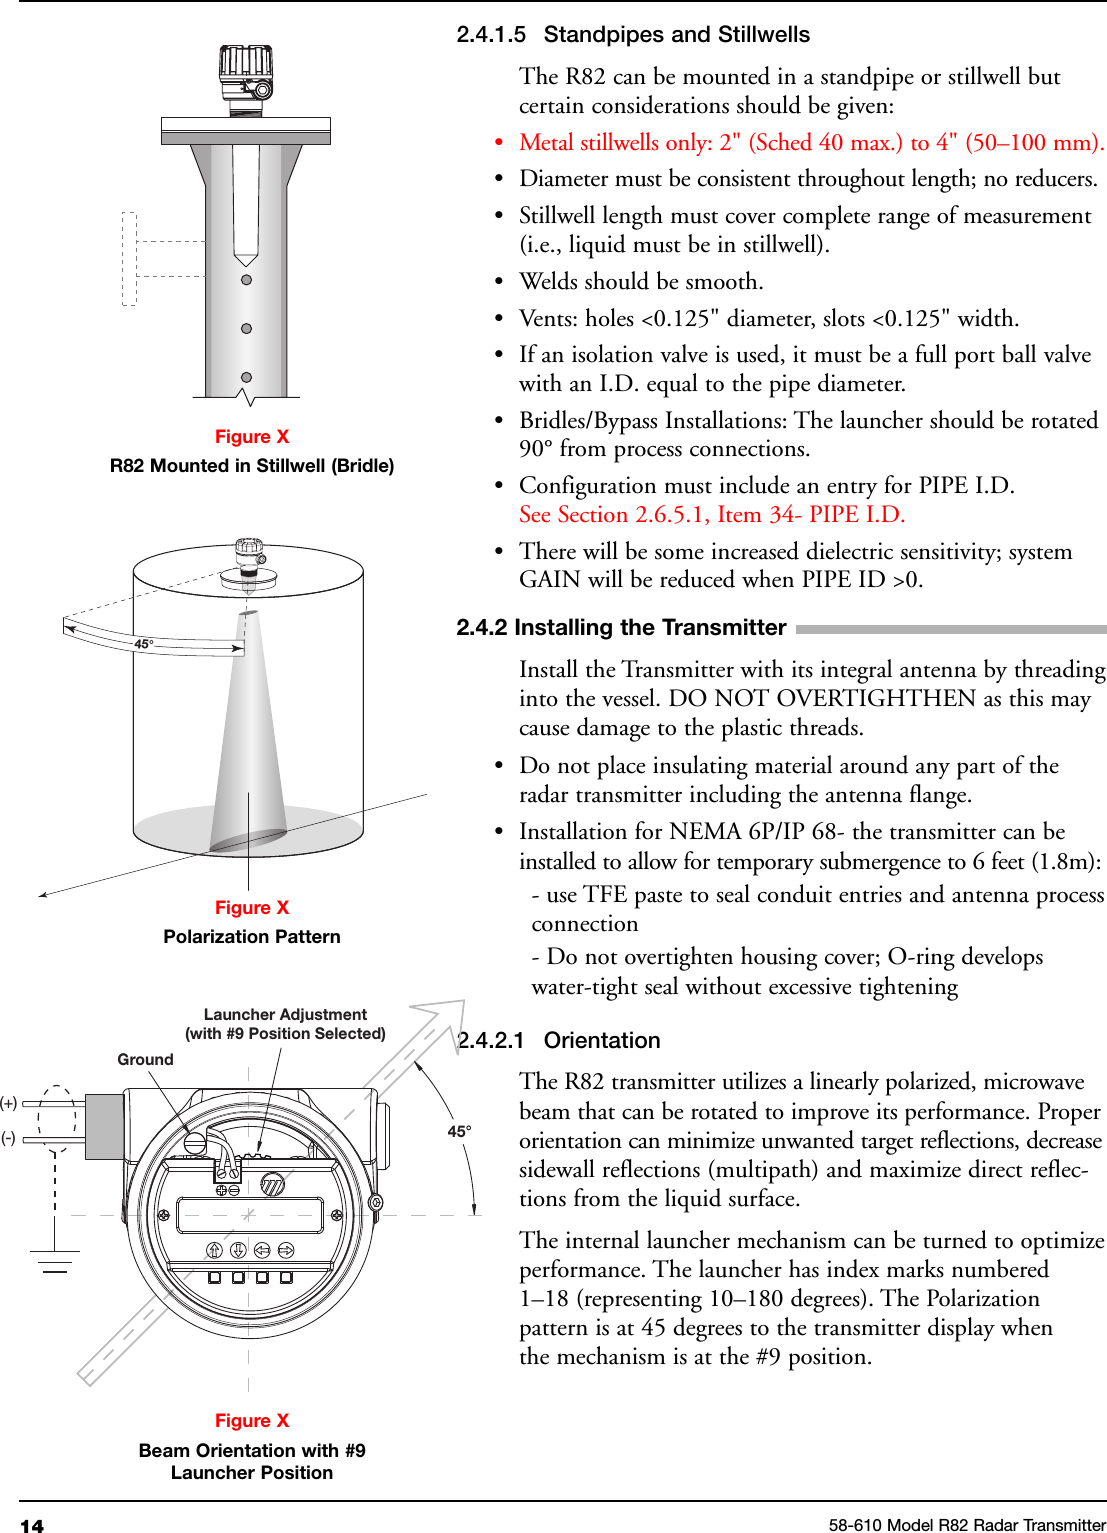 14 58-610 Model R82 Radar Transmitter2.4.1.5 Standpipes and StillwellsThe R82 can be mounted in a standpipe or stillwell butcertain considerations should be given:• Metal stillwells only: 2&quot; (Sched 40 max.) to 4&quot; (50–100 mm).• Diameter must be consistent throughout length; no reducers.• Stillwell length must cover complete range of measurement(i.e., liquid must be in stillwell).• Welds should be smooth.• Vents: holes &lt;0.125&quot; diameter, slots &lt;0.125&quot; width.• If an isolation valve is used, it must be a full port ball valvewith an I.D. equal to the pipe diameter.• Bridles/Bypass Installations: The launcher should be rotated90° from process connections.• Configuration must include an entry for PIPE I.D.See Section 2.6.5.1, Item 34- PIPE I.D.• There will be some increased dielectric sensitivity; systemGAIN will be reduced when PIPE ID &gt;0.2.4.2 Installing the TransmitterInstall the Transmitter with its integral antenna by threadinginto the vessel. DO NOT OVERTIGHTHEN as this maycause damage to the plastic threads.• Do not place insulating material around any part of theradar transmitter including the antenna flange.• Installation for NEMA 6P/IP 68- the transmitter can beinstalled to allow for temporary submergence to 6 feet (1.8m):- use TFE paste to seal conduit entries and antenna processconnection- Do not overtighten housing cover; O-ring developswater-tight seal without excessive tightening2.4.2.1 OrientationThe R82 transmitter utilizes a linearly polarized, microwavebeam that can be rotated to improve its performance. Properorientation can minimize unwanted target reflections, decreasesidewall reflections (multipath) and maximize direct reflec-tions from the liquid surface.The internal launcher mechanism can be turned to optimizeperformance. The launcher has index marks numbered1–18 (representing 10–180 degrees). The Polarizationpattern is at 45 degrees to the transmitter display whenthe mechanism is at the #9 position.Figure XBeam Orientation with #9Launcher PositionFigure XR82 Mounted in Stillwell (Bridle)GroundLauncher Adjustment(with #9 Position Selected)45°(+)(-)45°Figure XPolarization Pattern